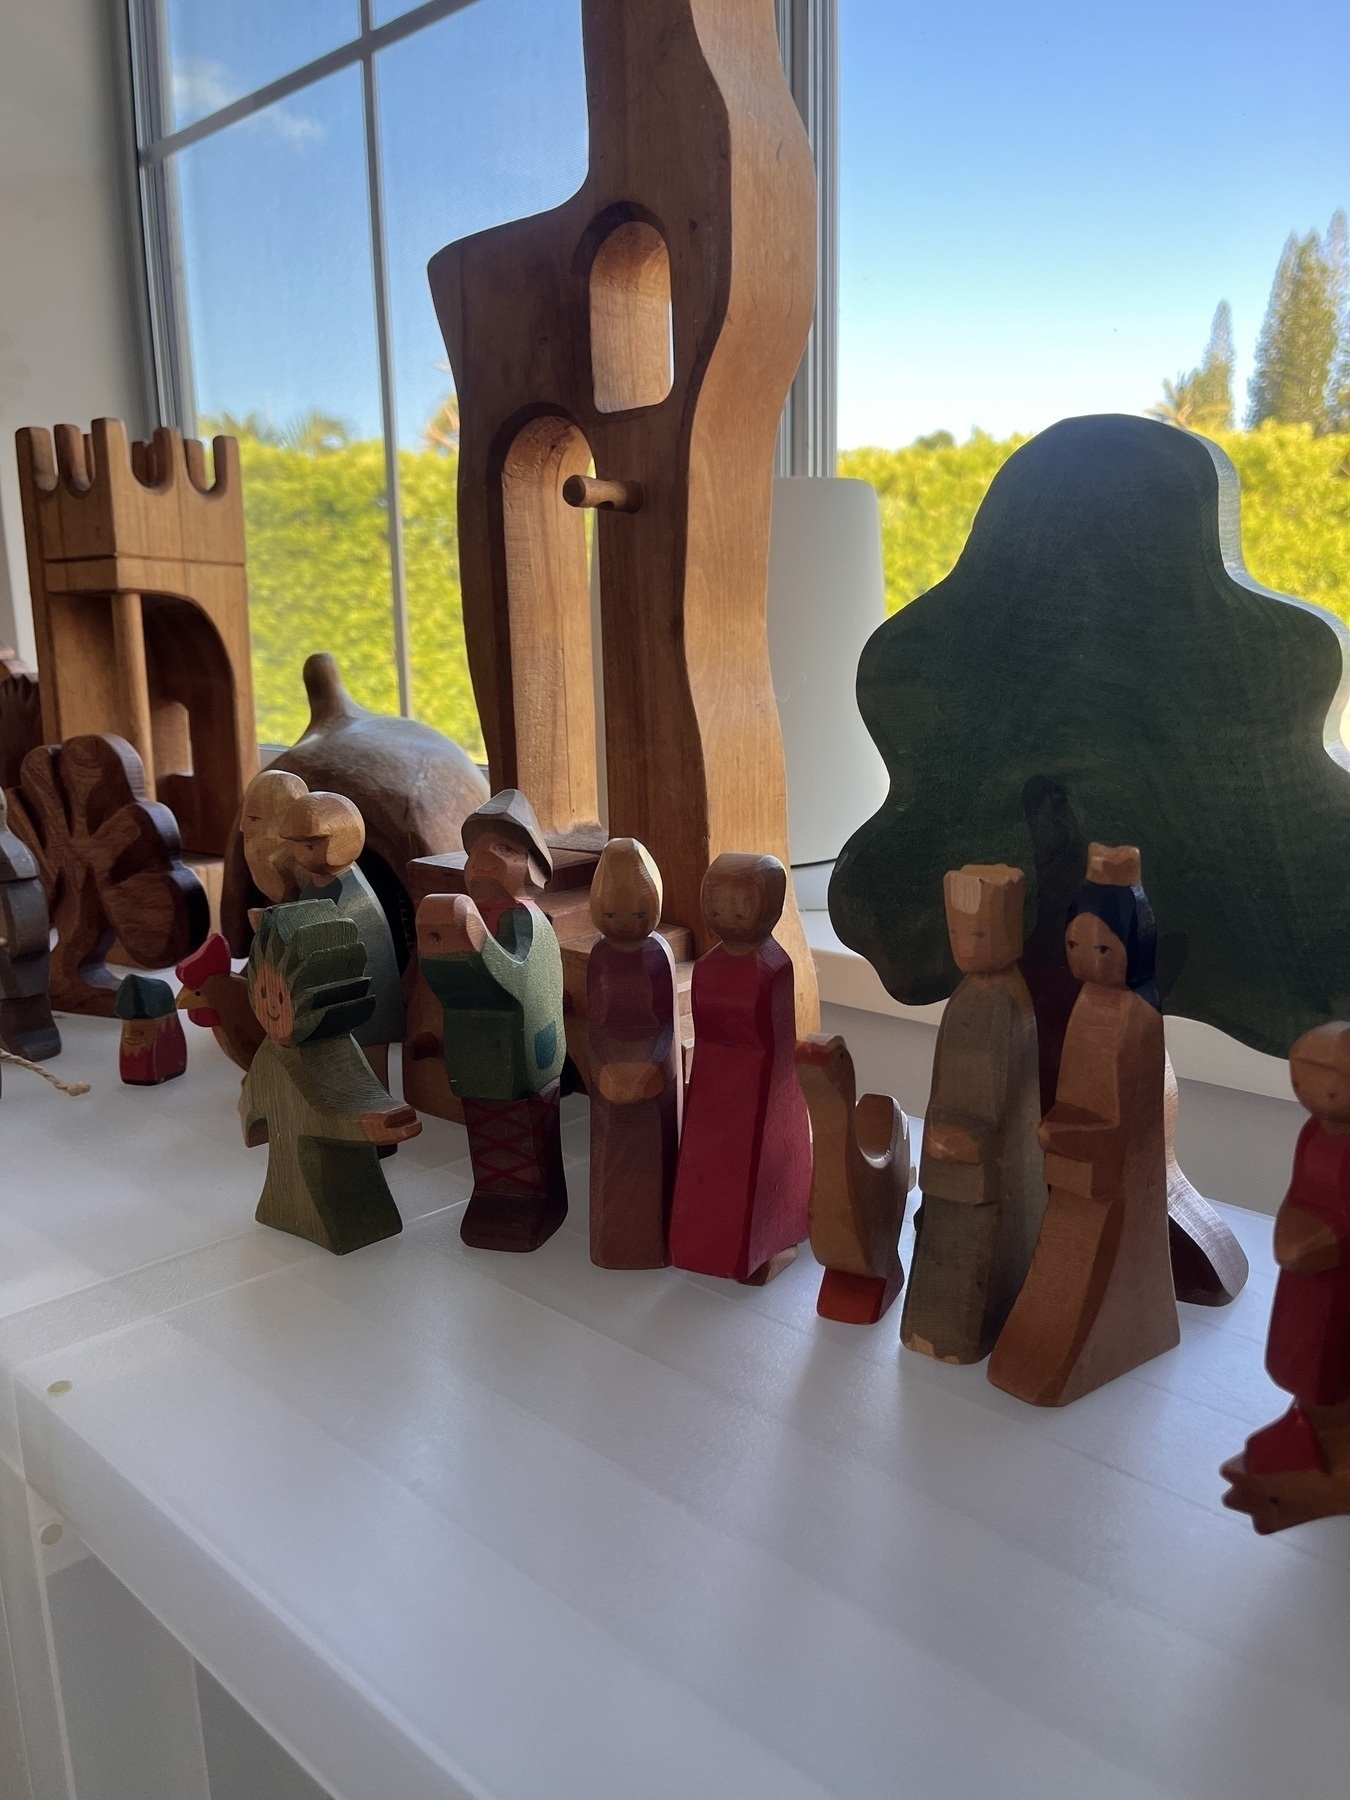 A row of wooden toys in the shape of castles, people and animals, all sitting on a shelf with a window behind. Outside there is blue sky and a green hedge.